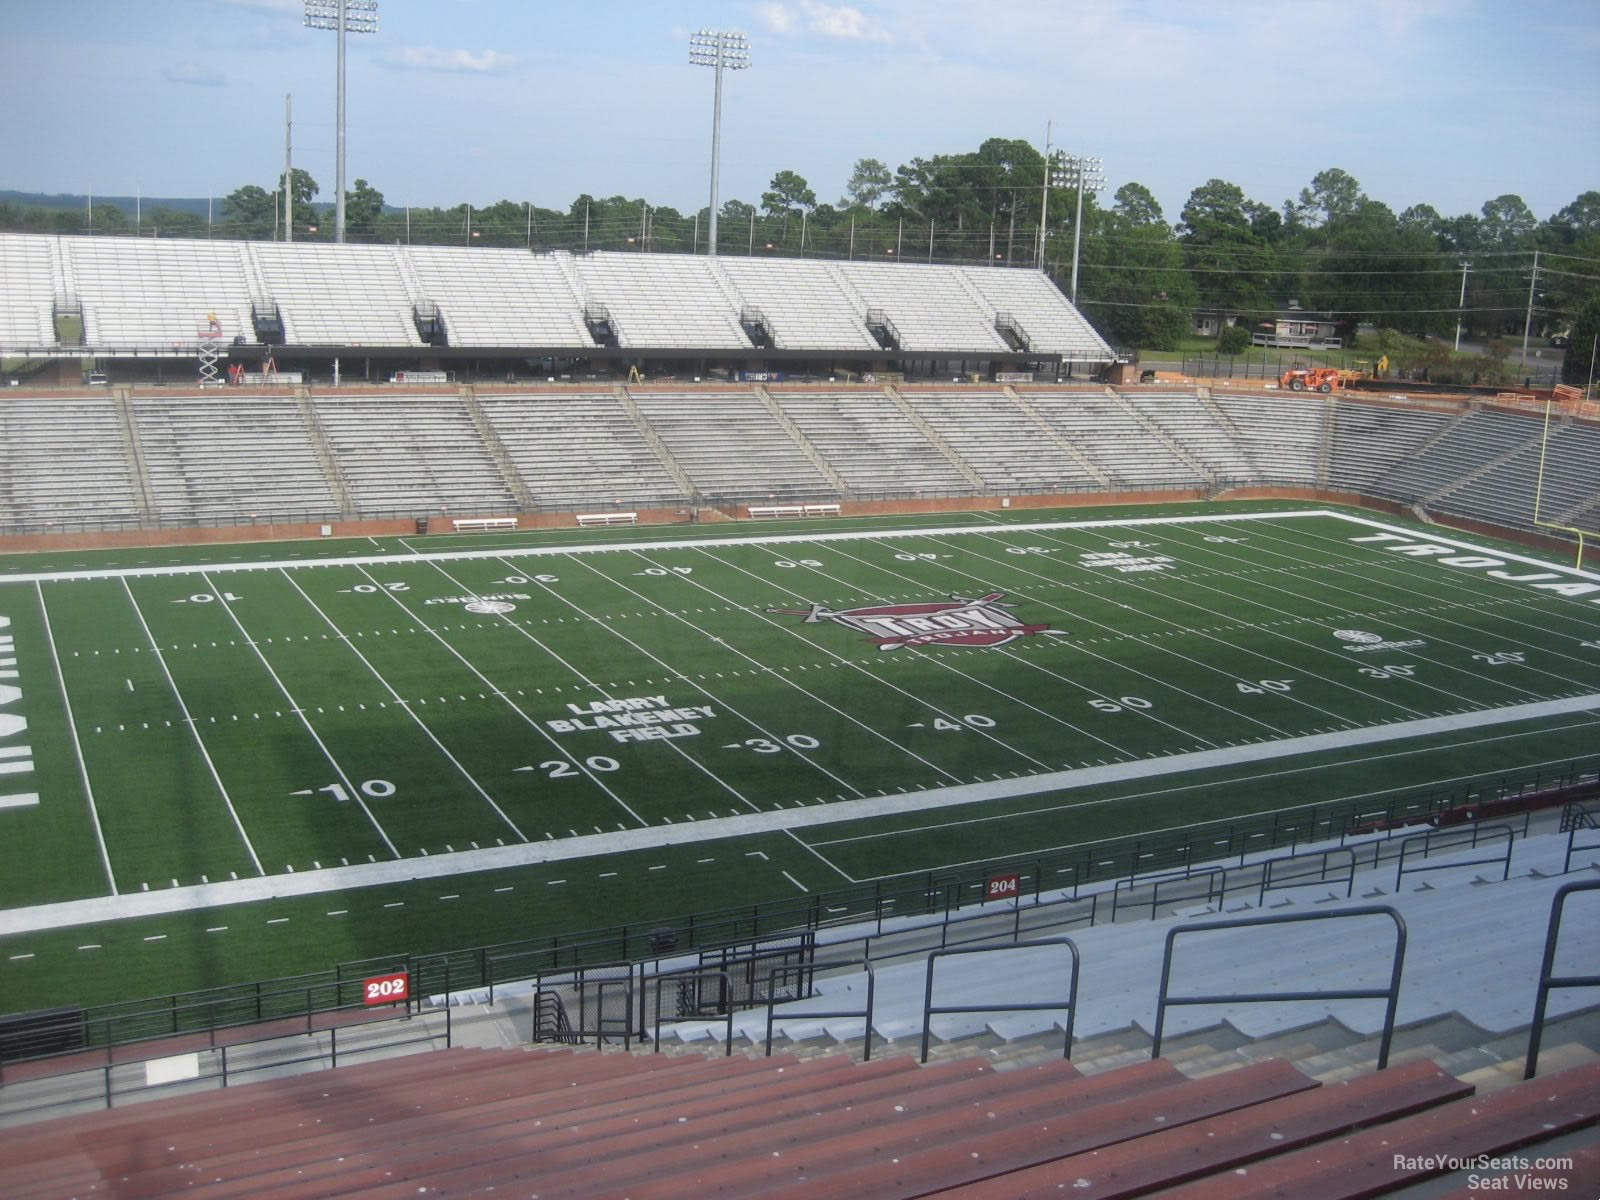 section 202, row 30 seat view  - troy memorial stadium